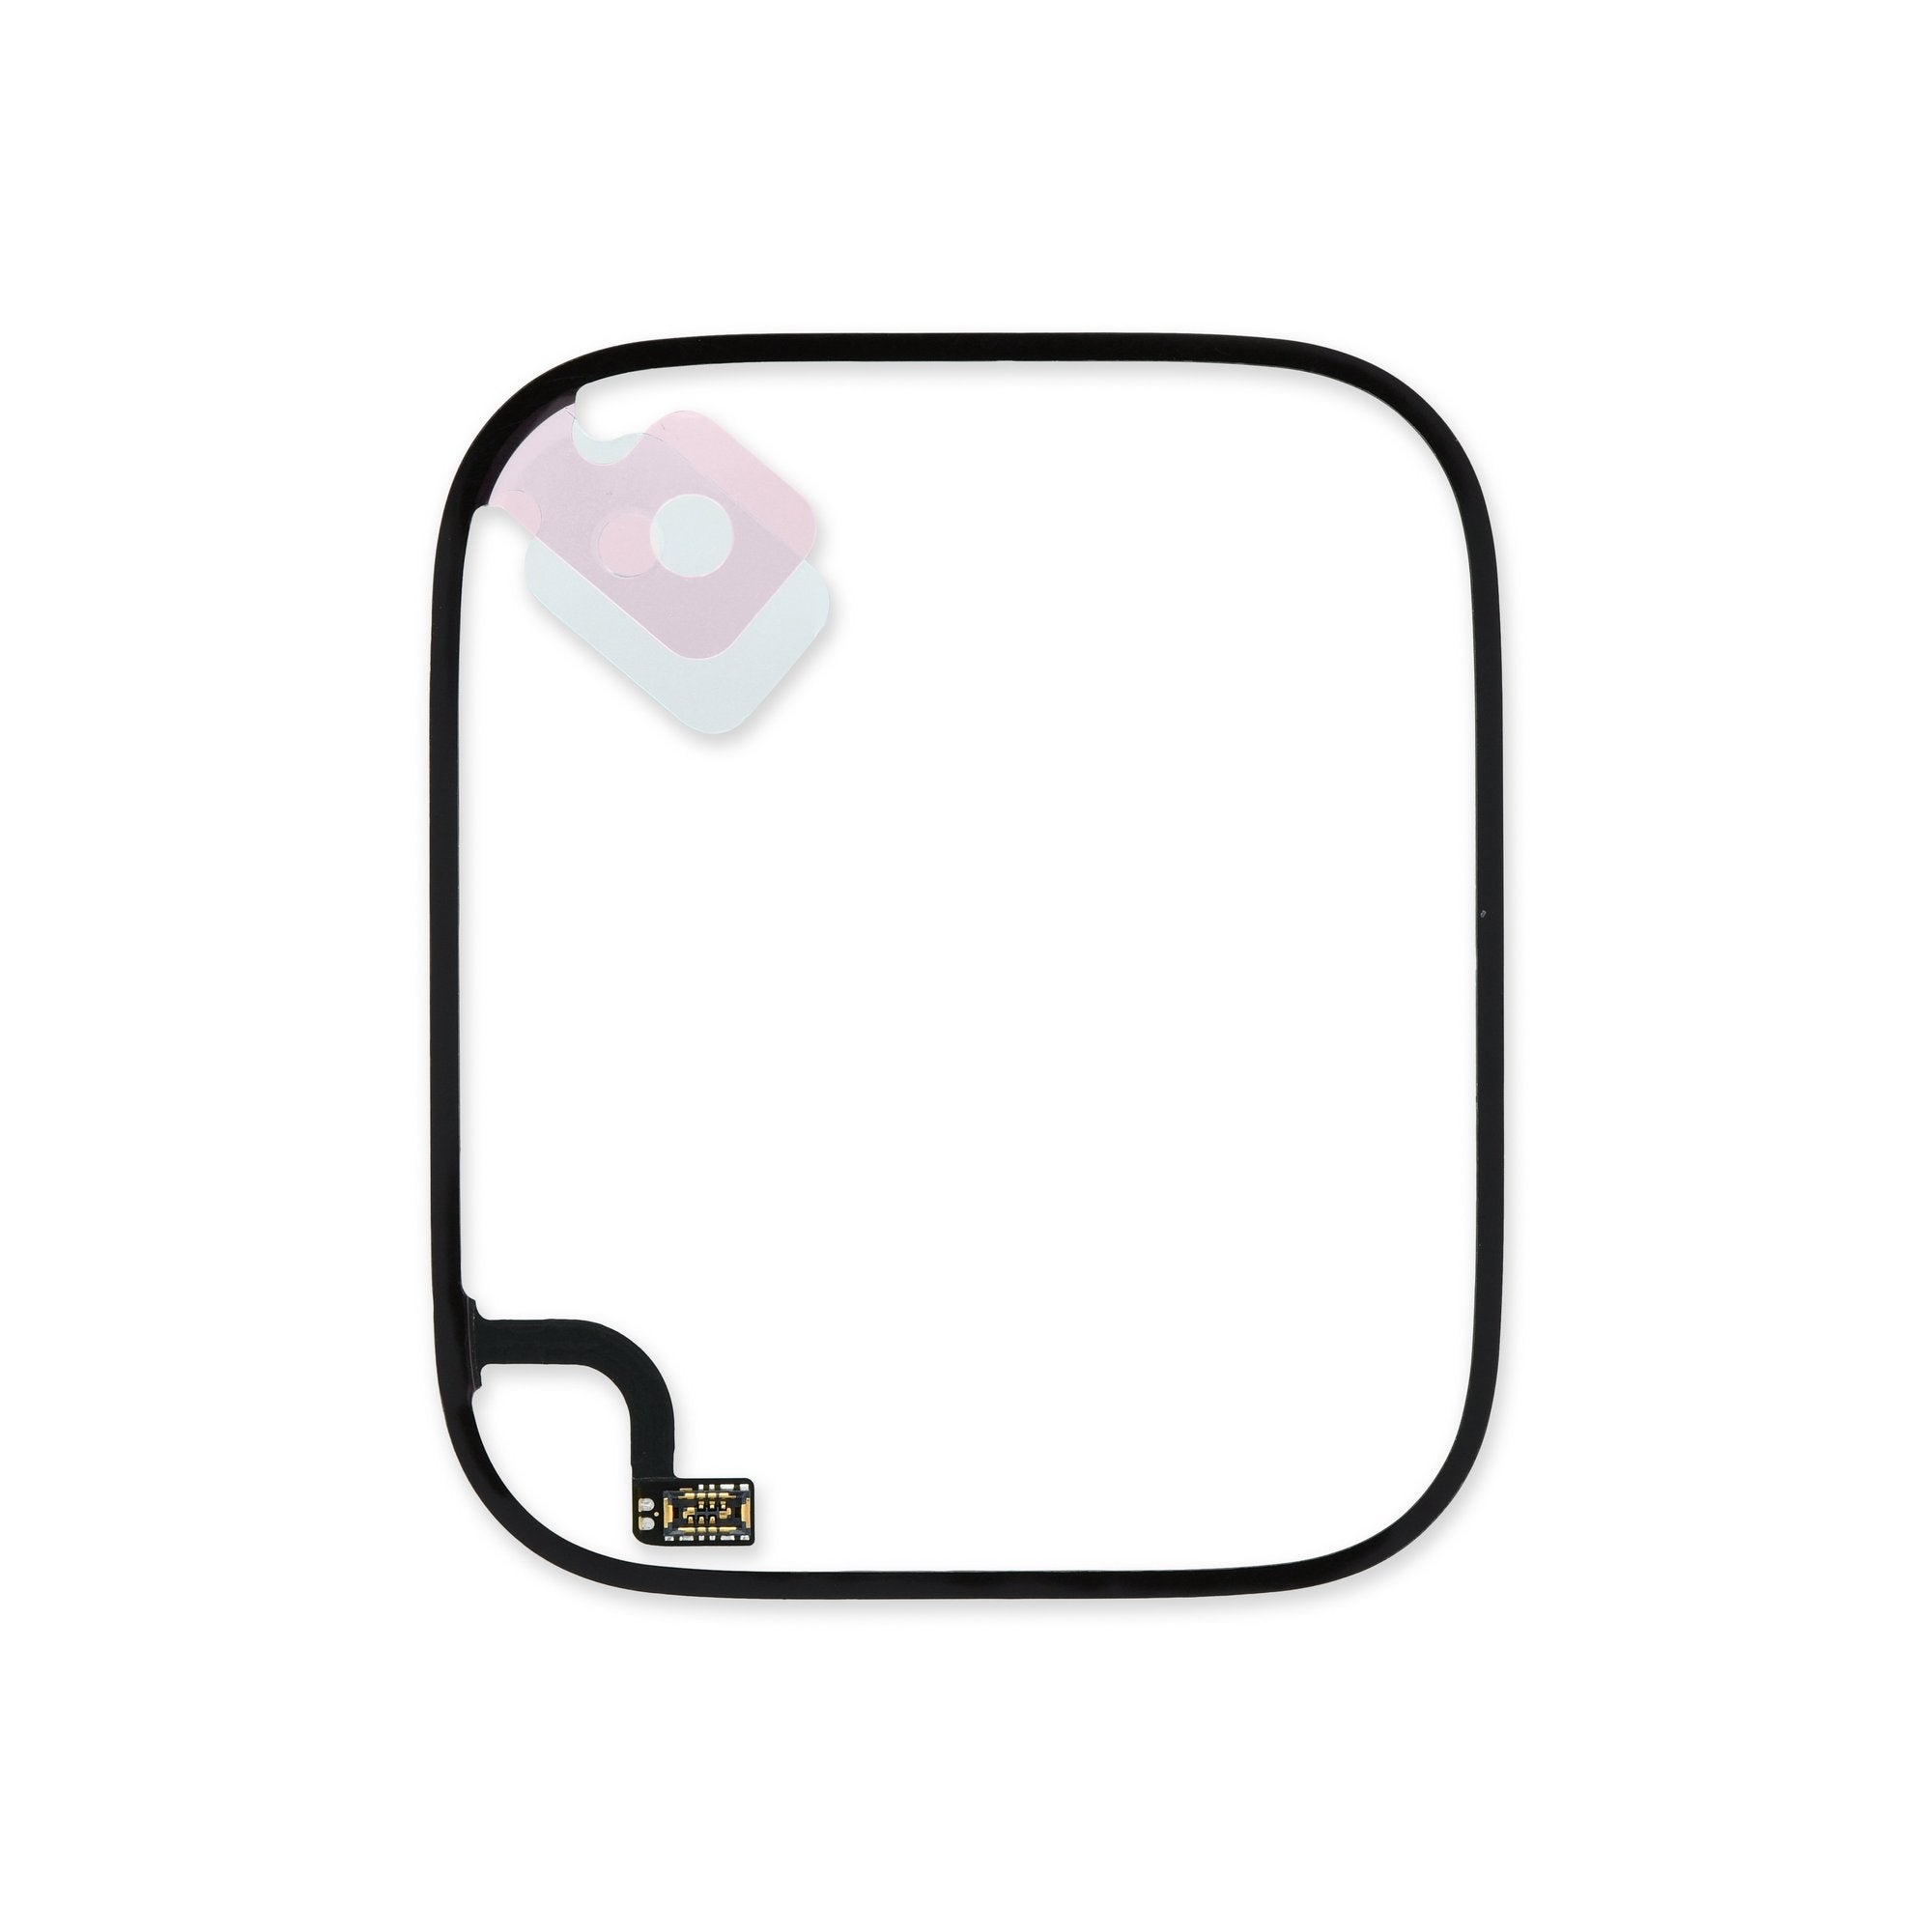 Apple Watch (44 mm Series 5) Force Touch Sensor Gasket New Installation Adhesive Included